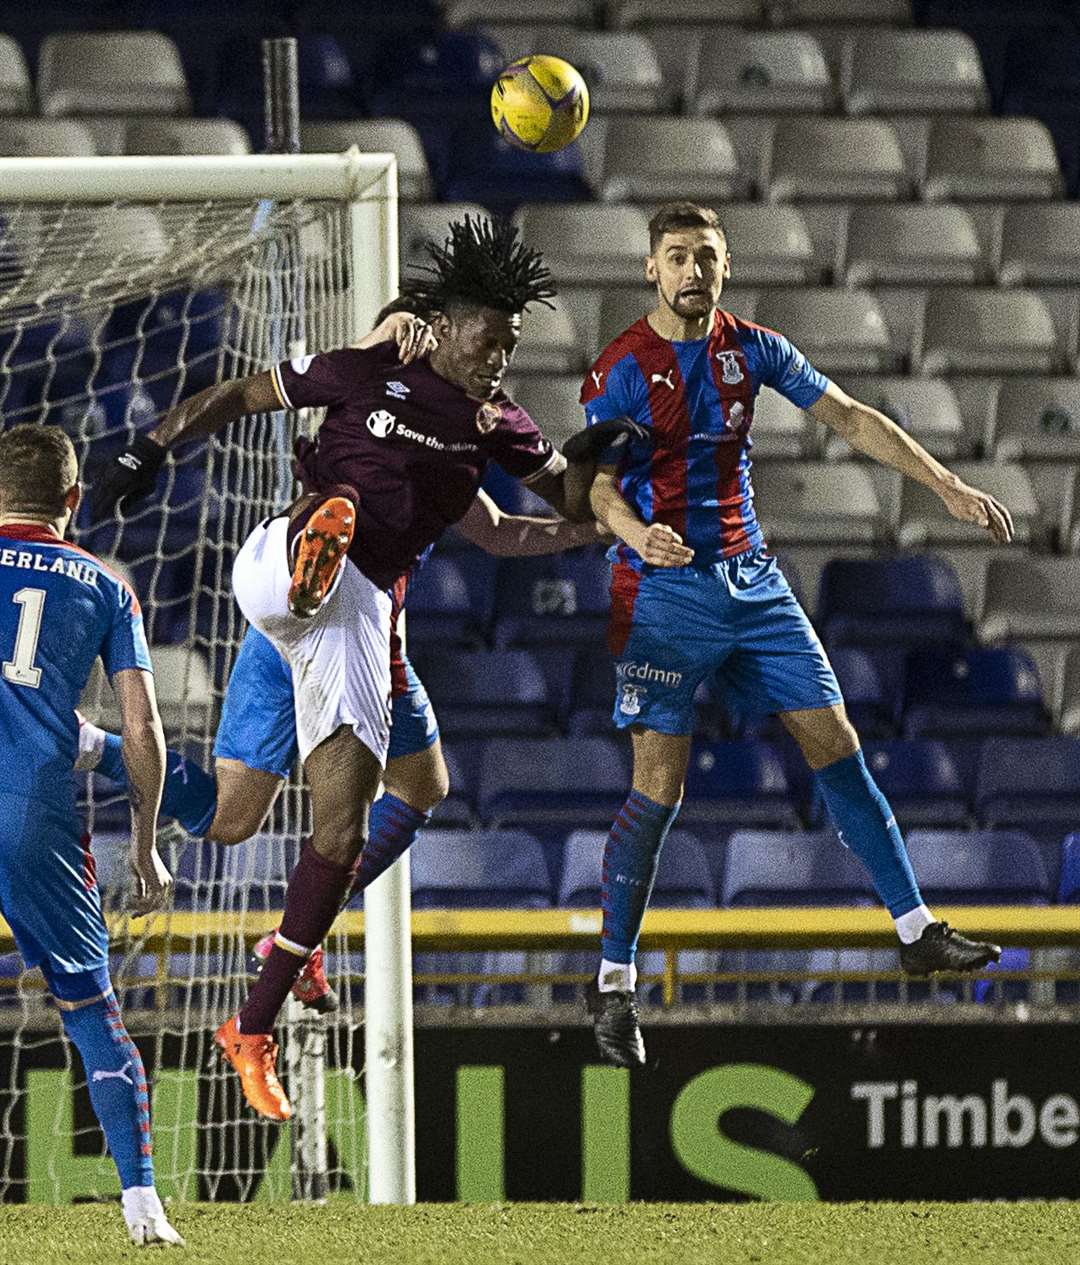 Picture - Ken Macpherson, Inverness. Inverness CT(1) v Hearts(1). 26.02.21. ICT’s Robbie Deas heads clear from Hearts' Armand Gnanduillet.